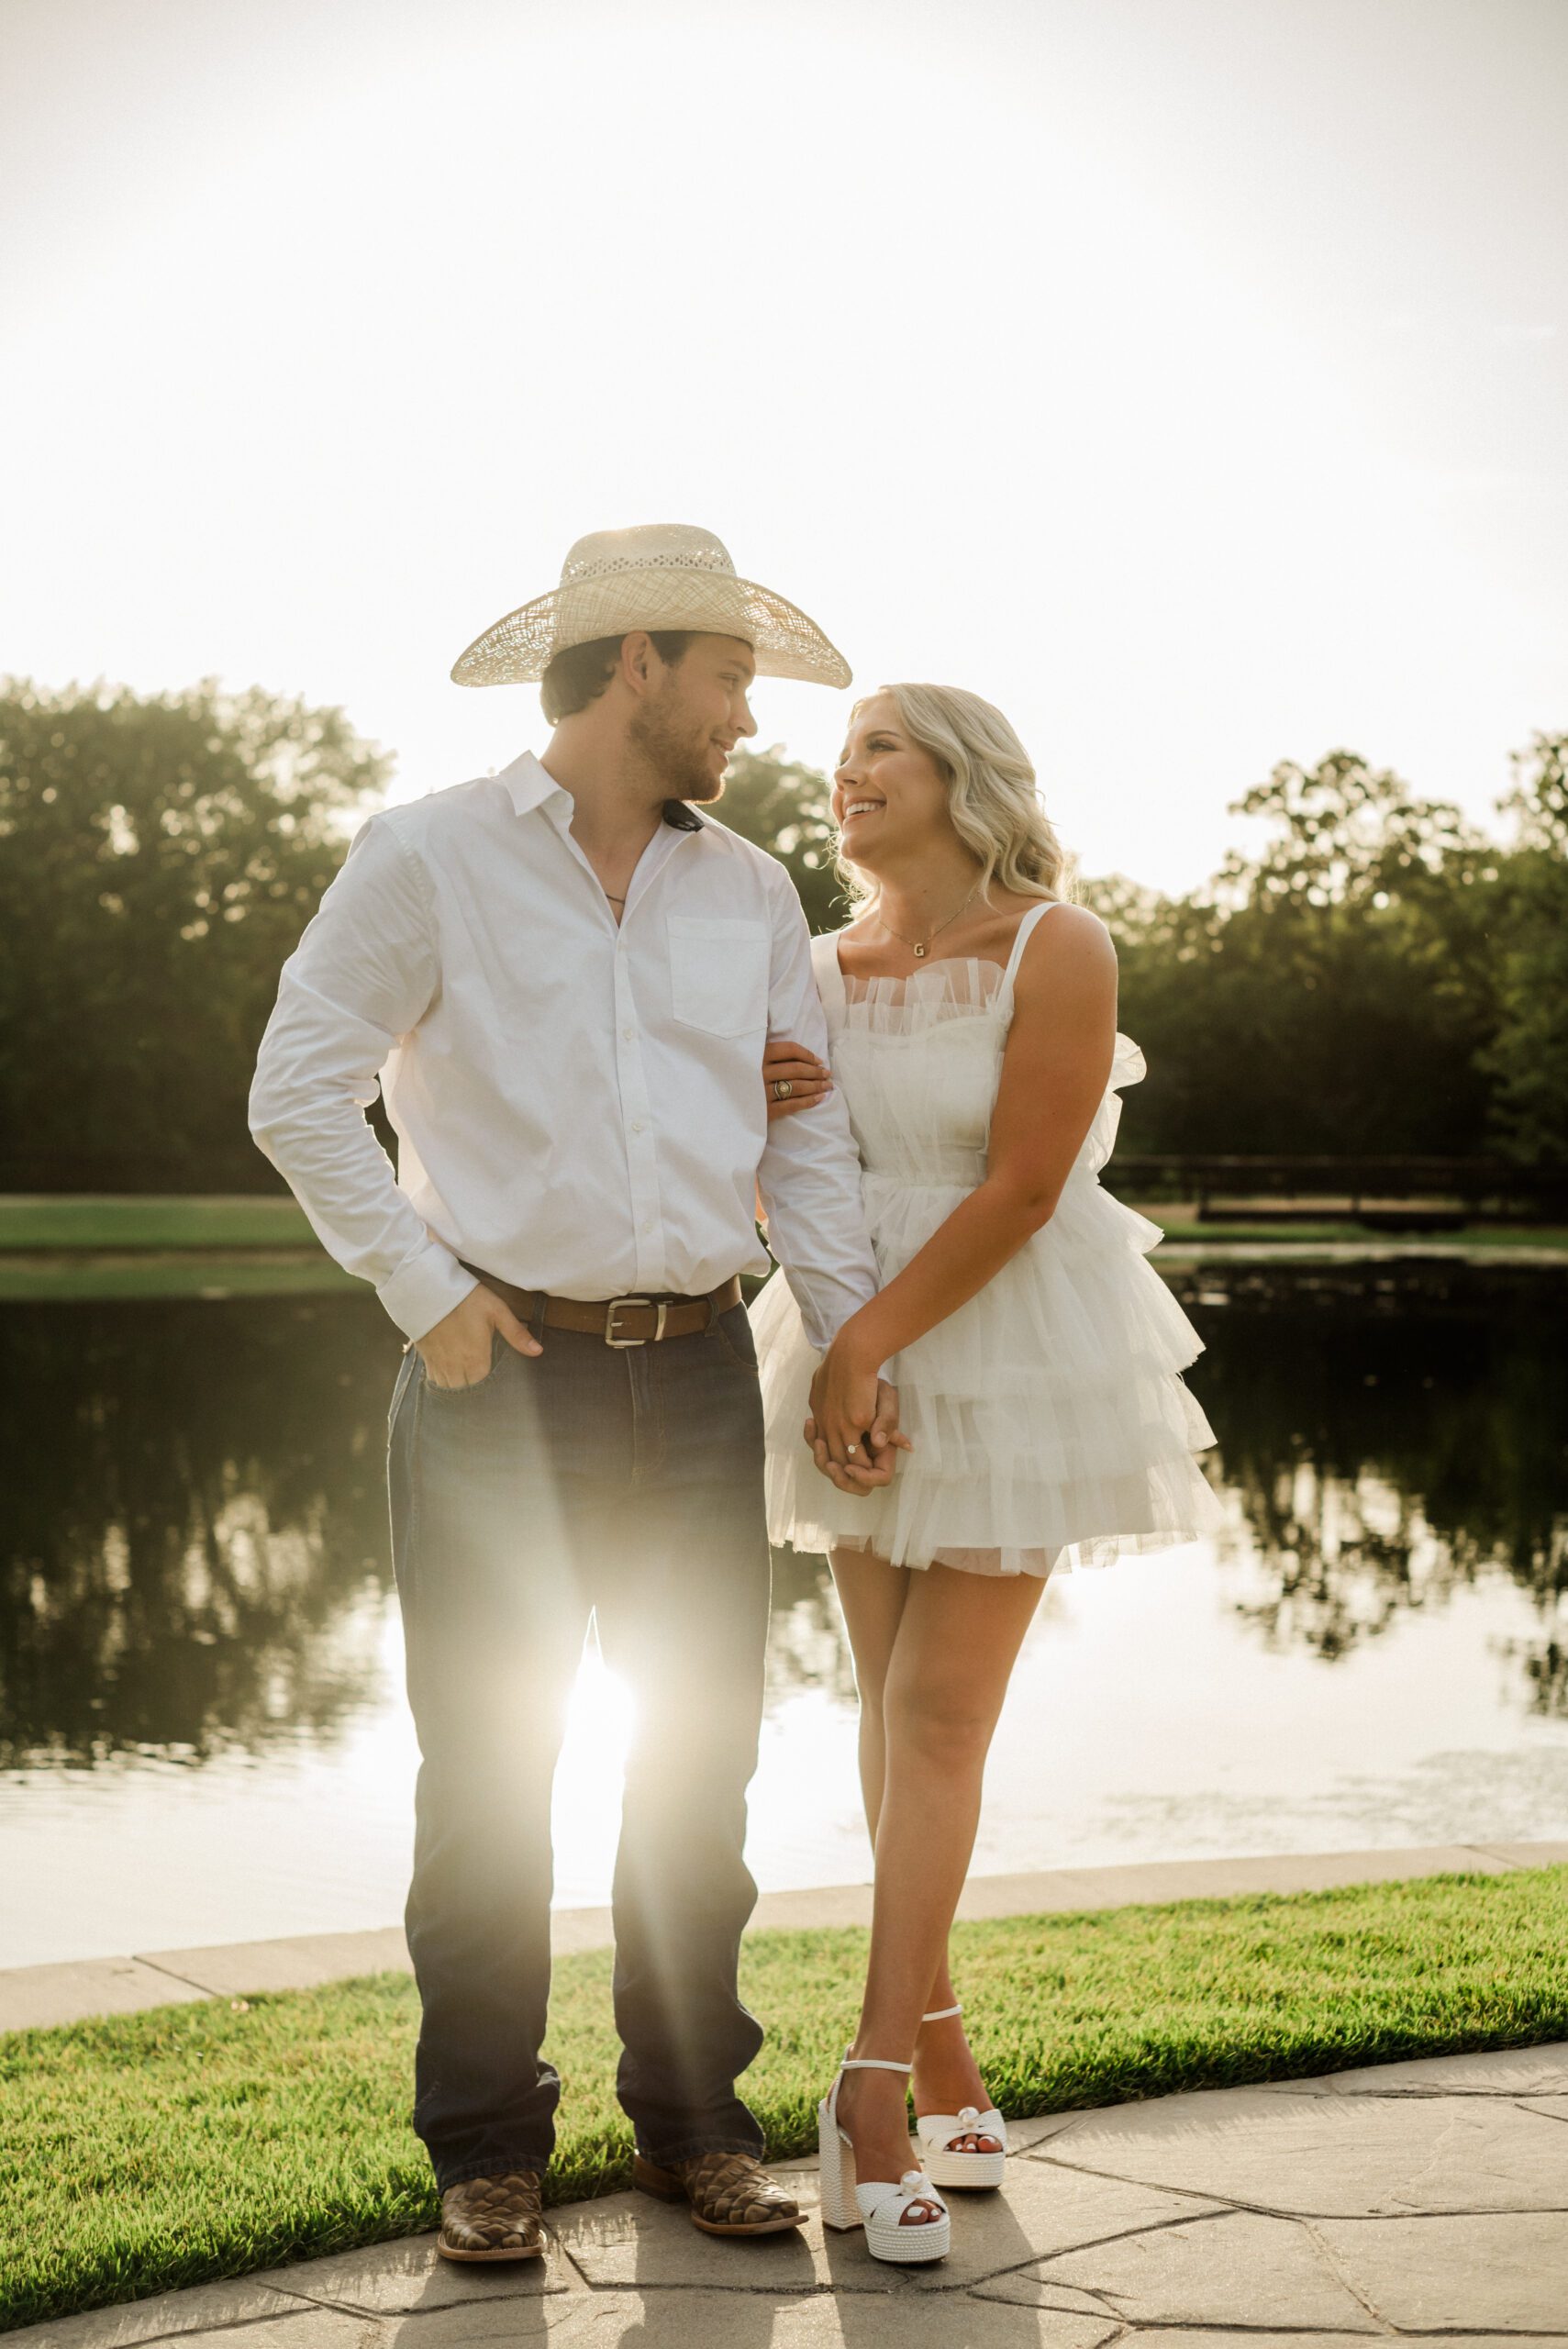 Faith and Garrett's Peach Creek Ranch Engagement Session in College Station, TX with Rachel Driskell Photography